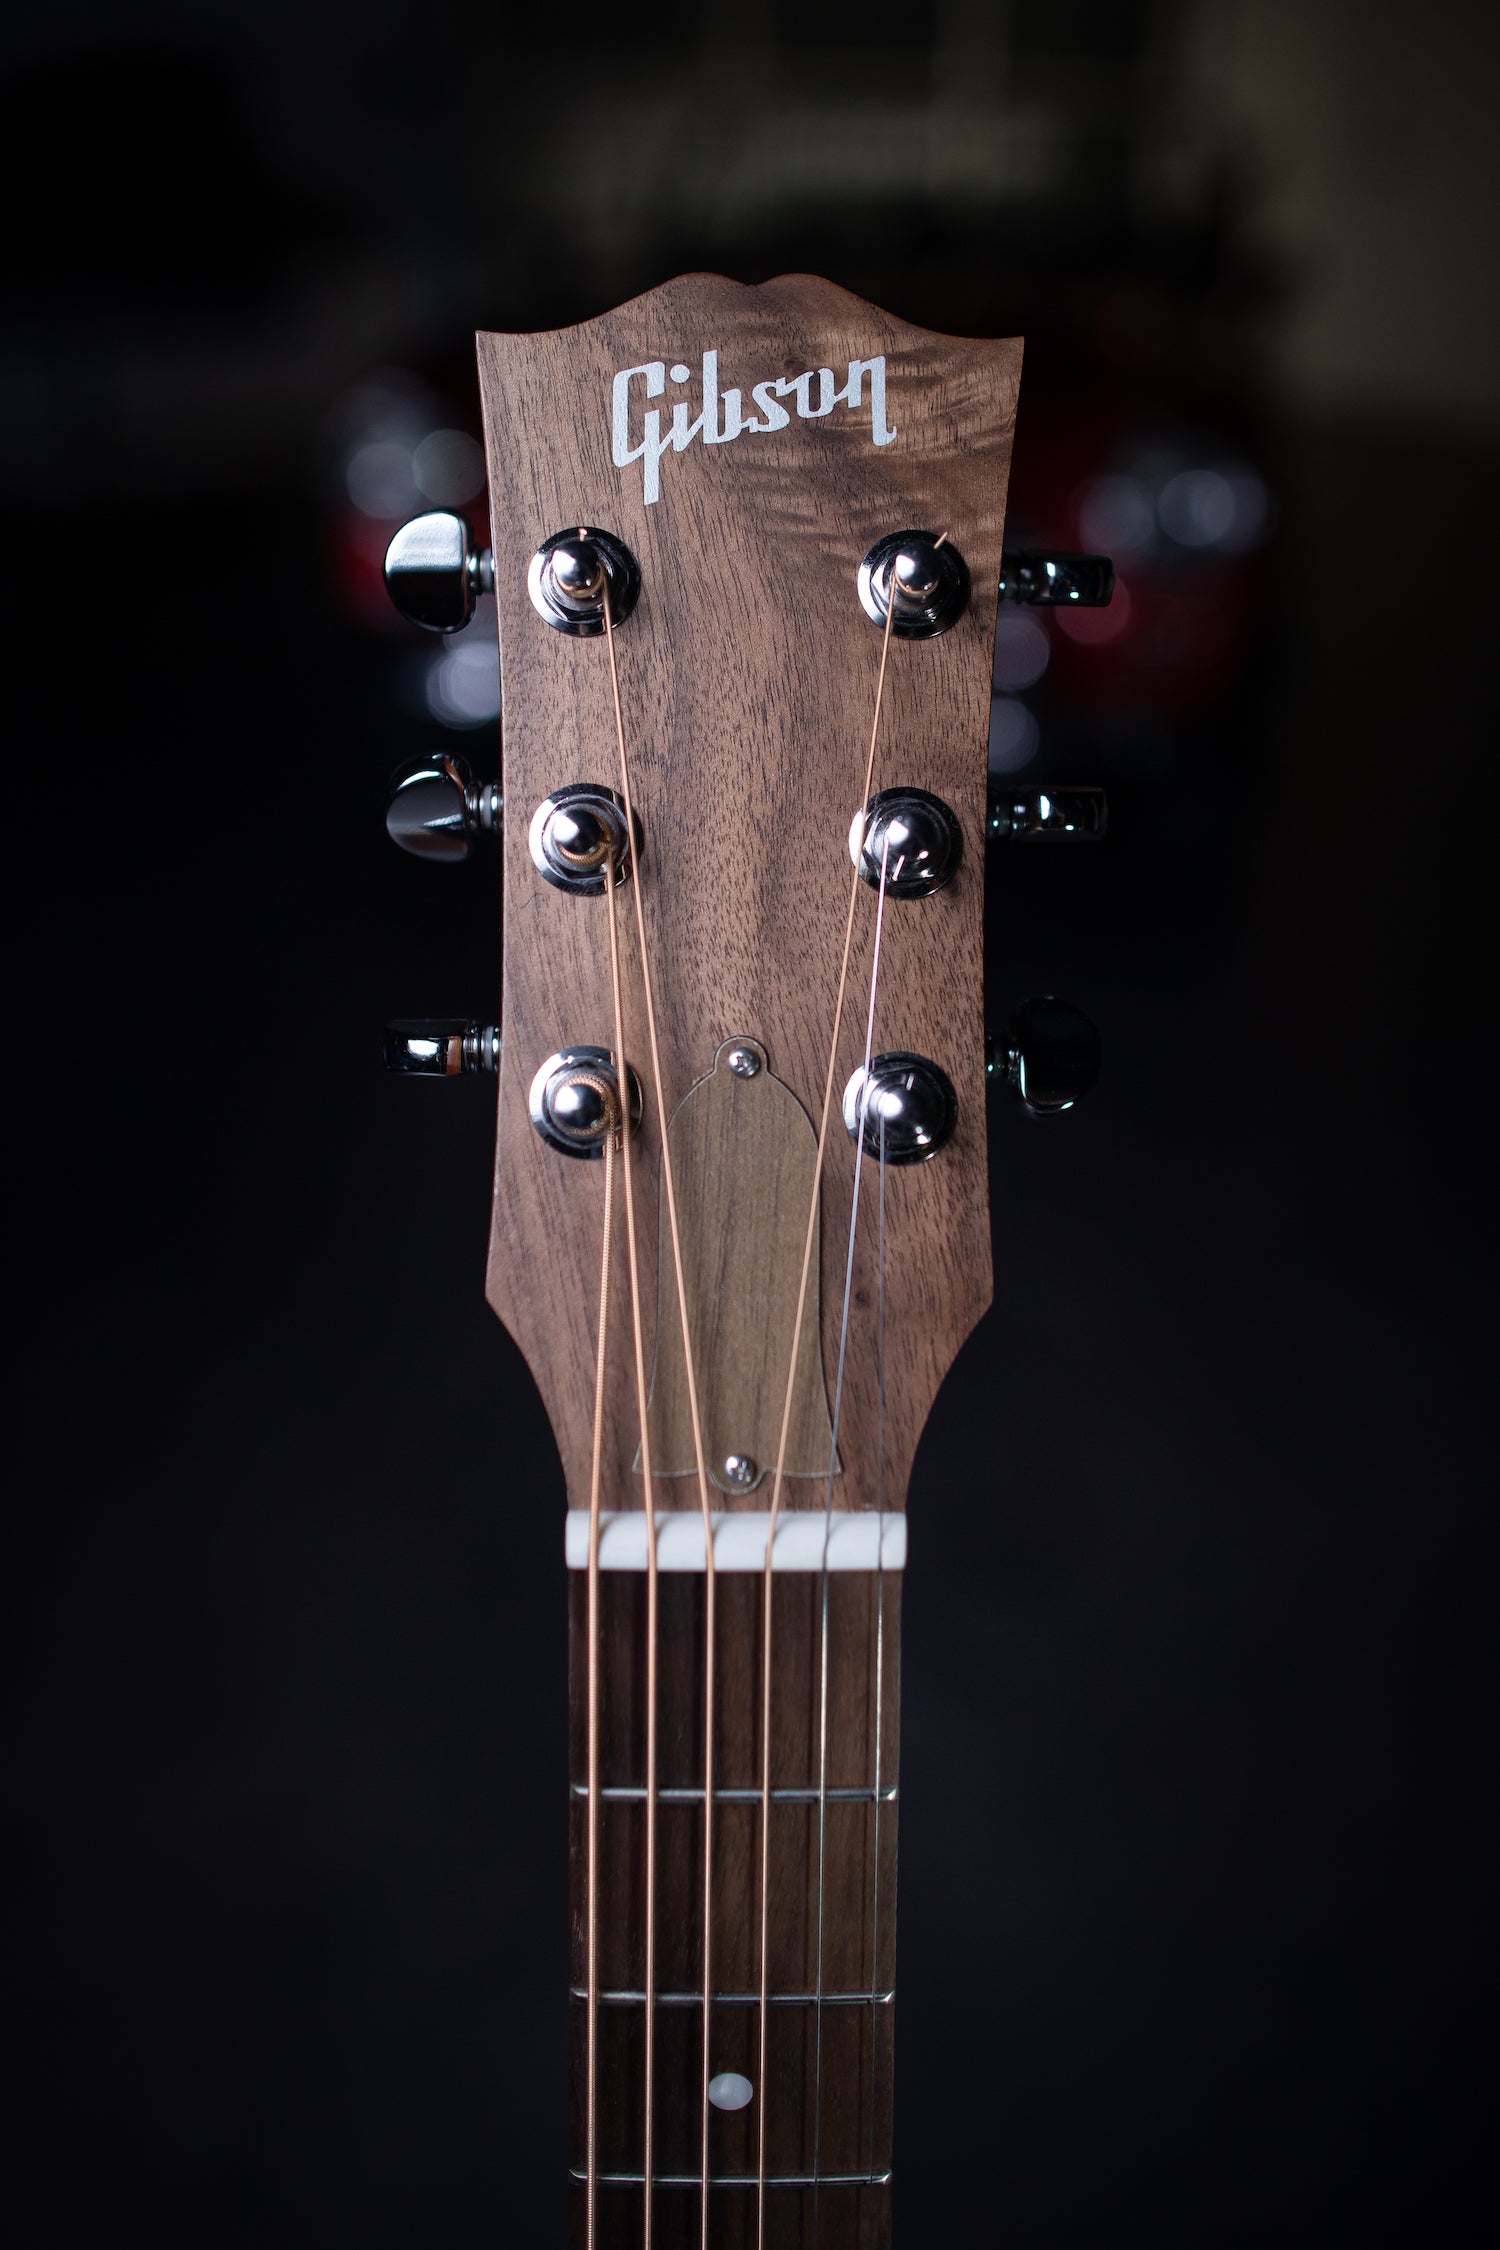 Gibson G-45 Studio Acoustic-Electric Guitar - Antique Natural